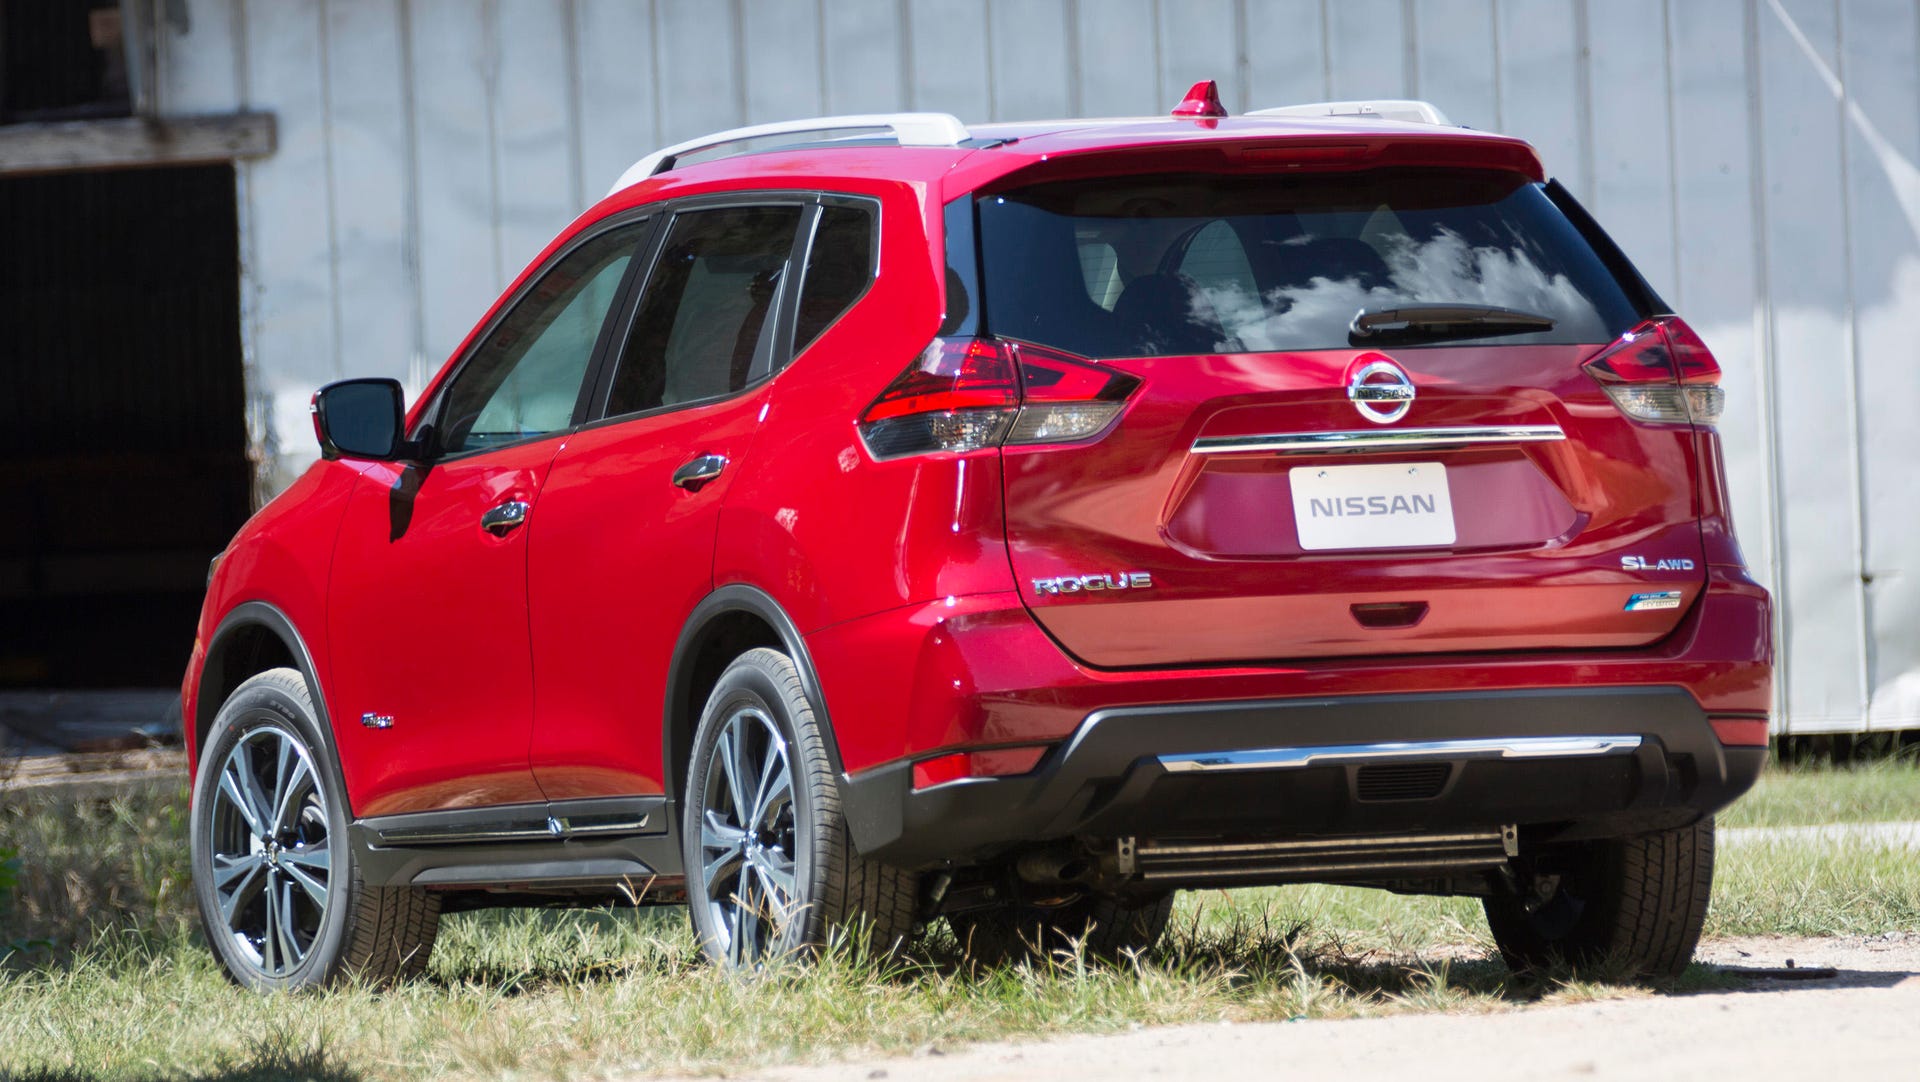 2019 Nissan Rogue: Model overview, pricing, tech and specs - CNET